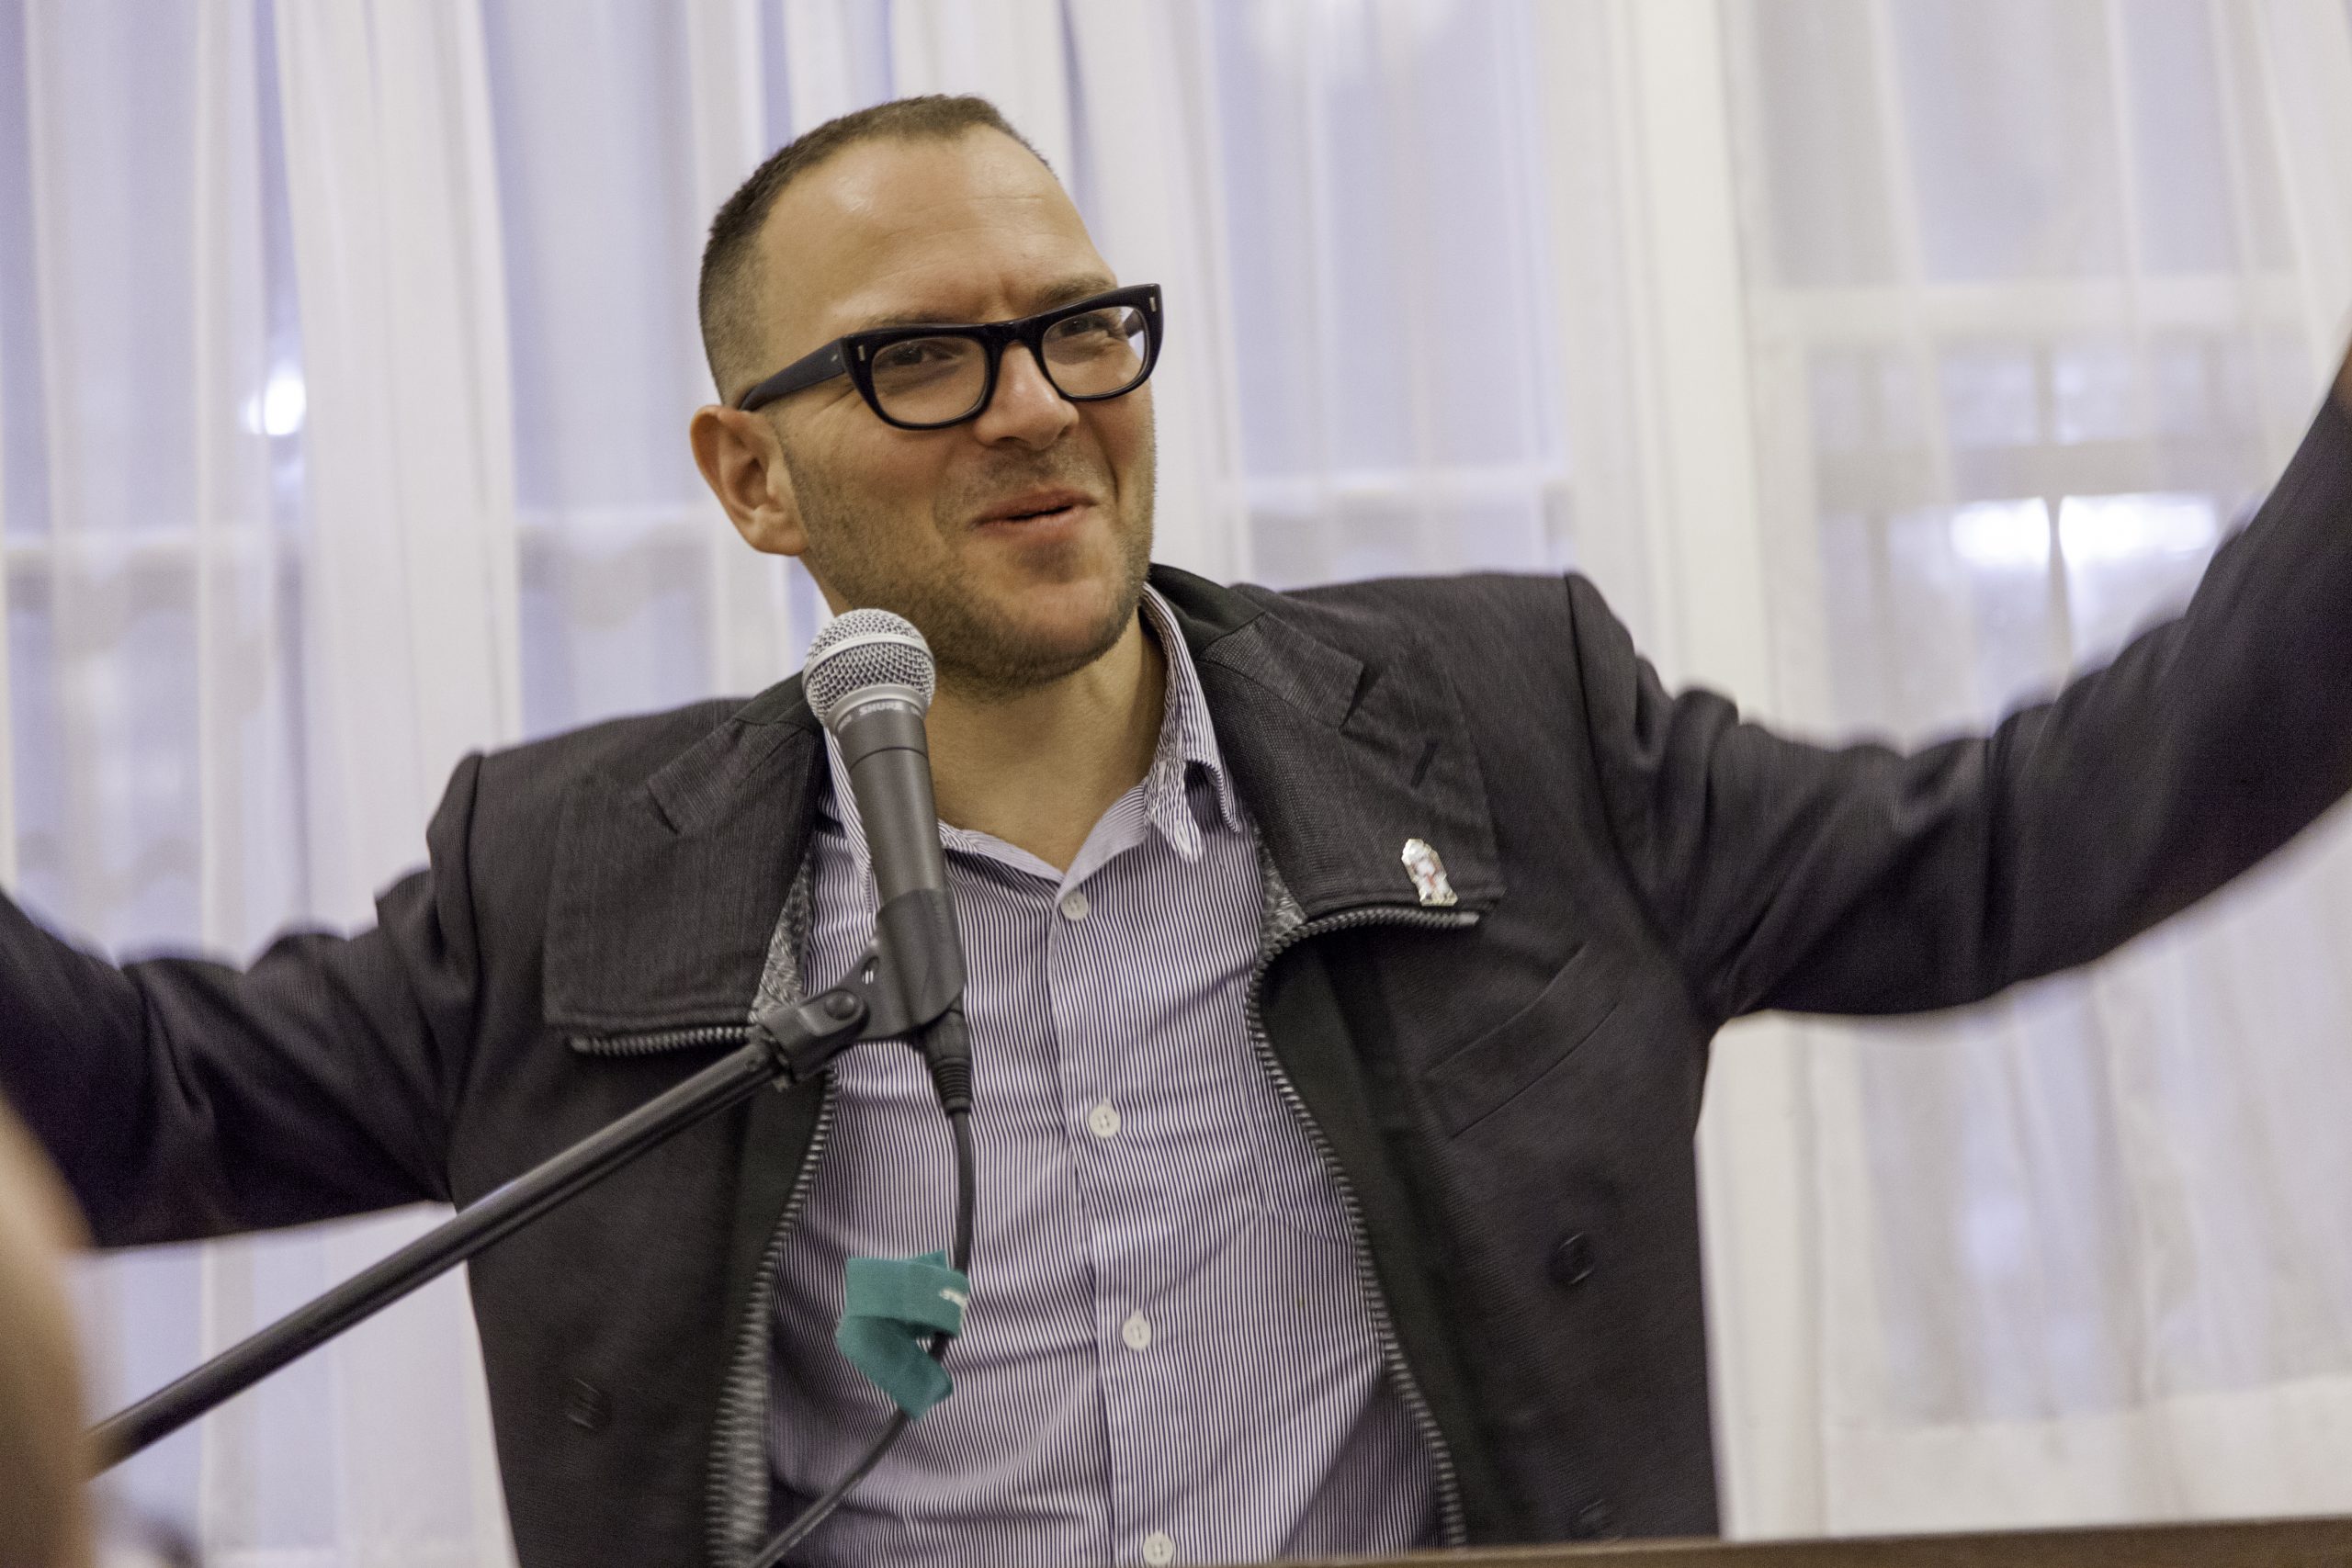 102. Cory Doctorow Coined "Enshittification." He Sees 4 Ways to End It. - Initiative for Digital Public Infrastructure at UMass Amherst